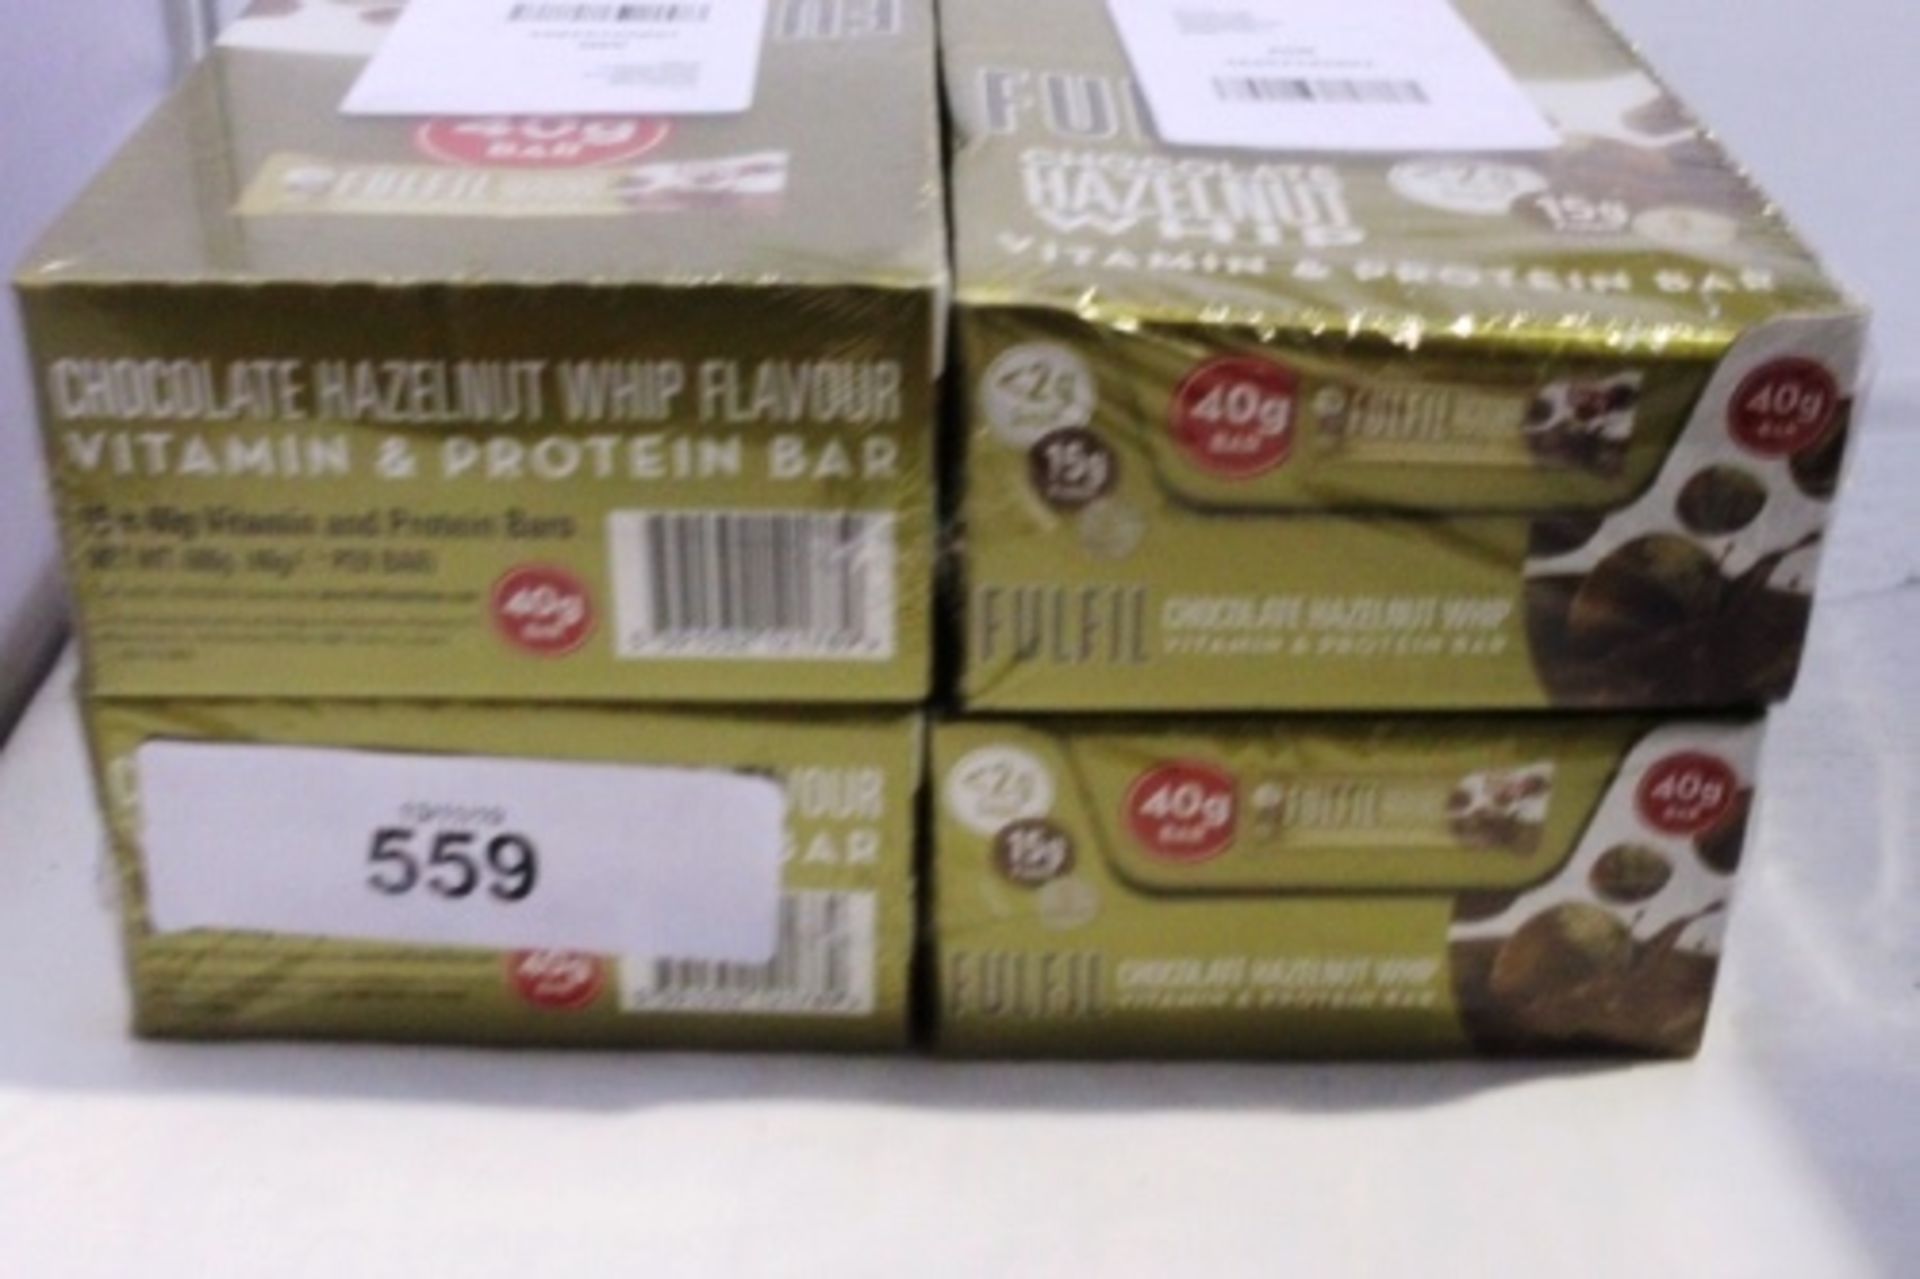 4 x boxes each containing 15 x bars of Fulfil Chocolate Hazelnut Whip protein bars, expiry 06/